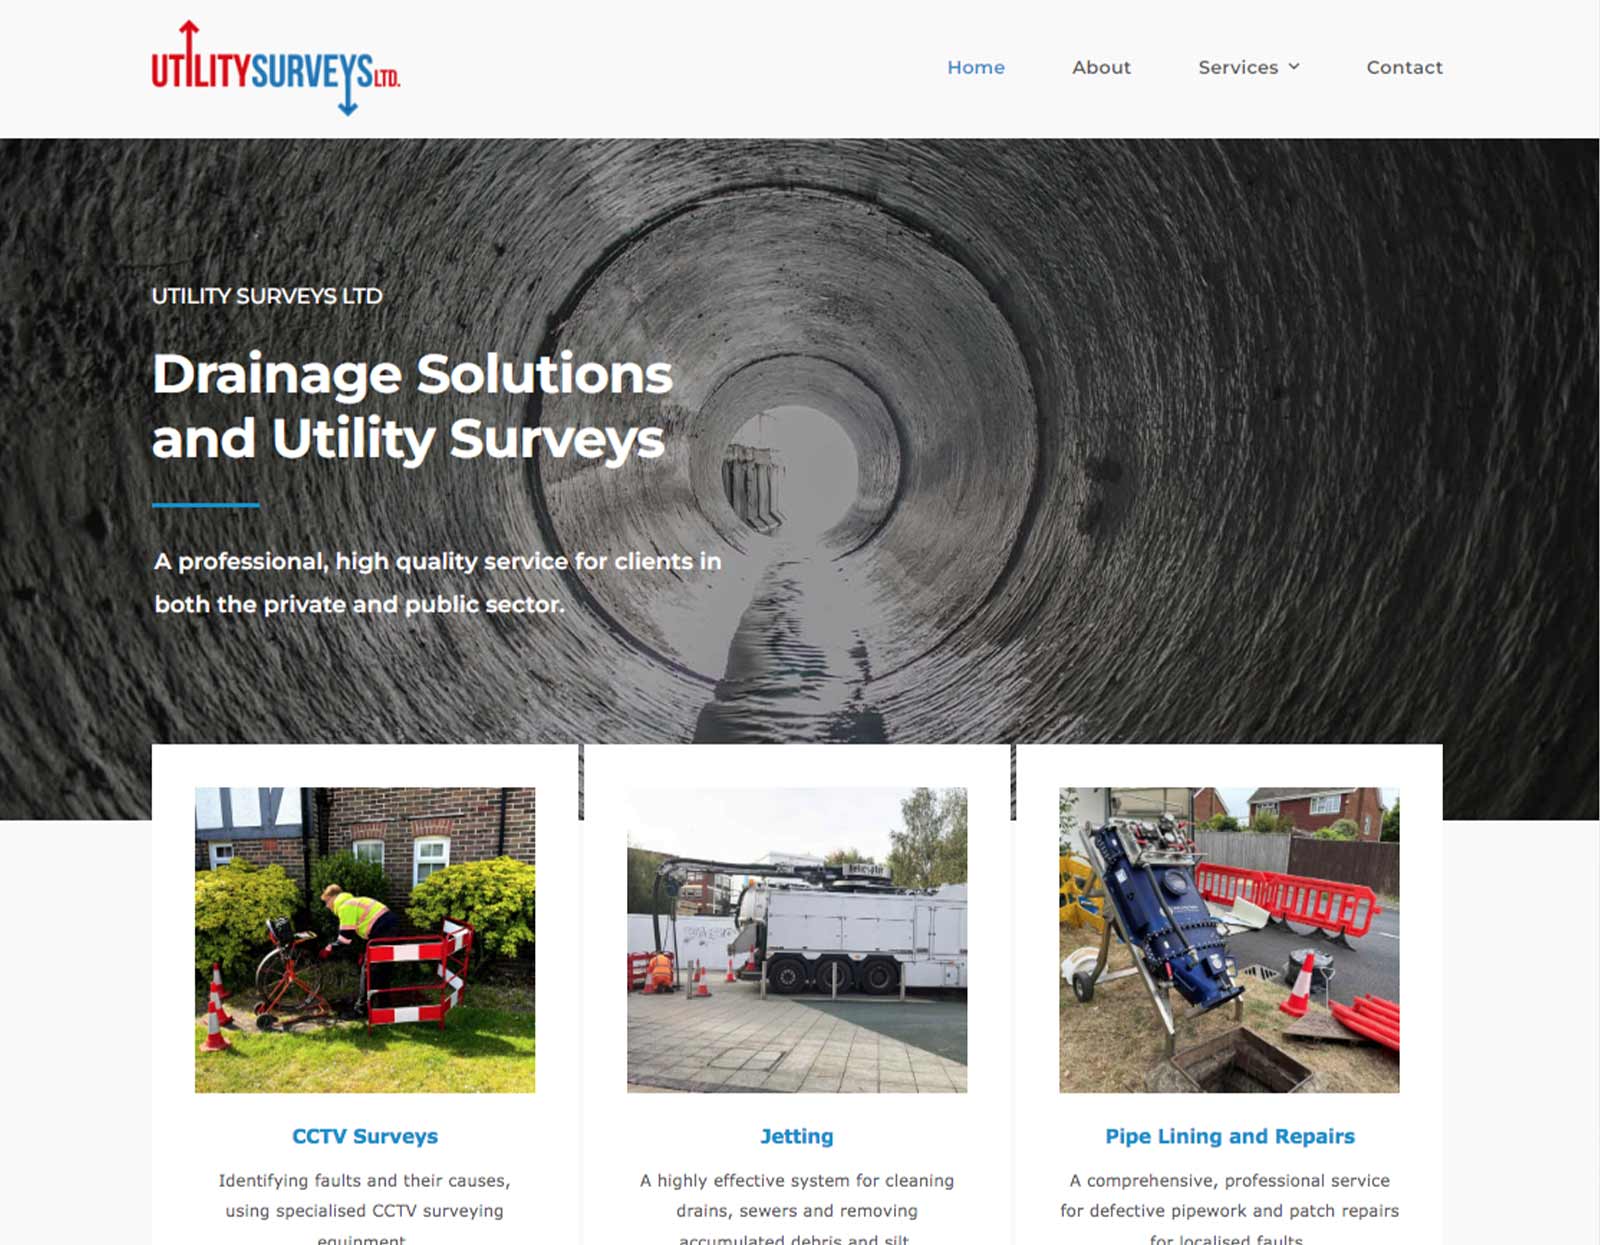 Image of web design for Utility Surveys, showing the website home page.